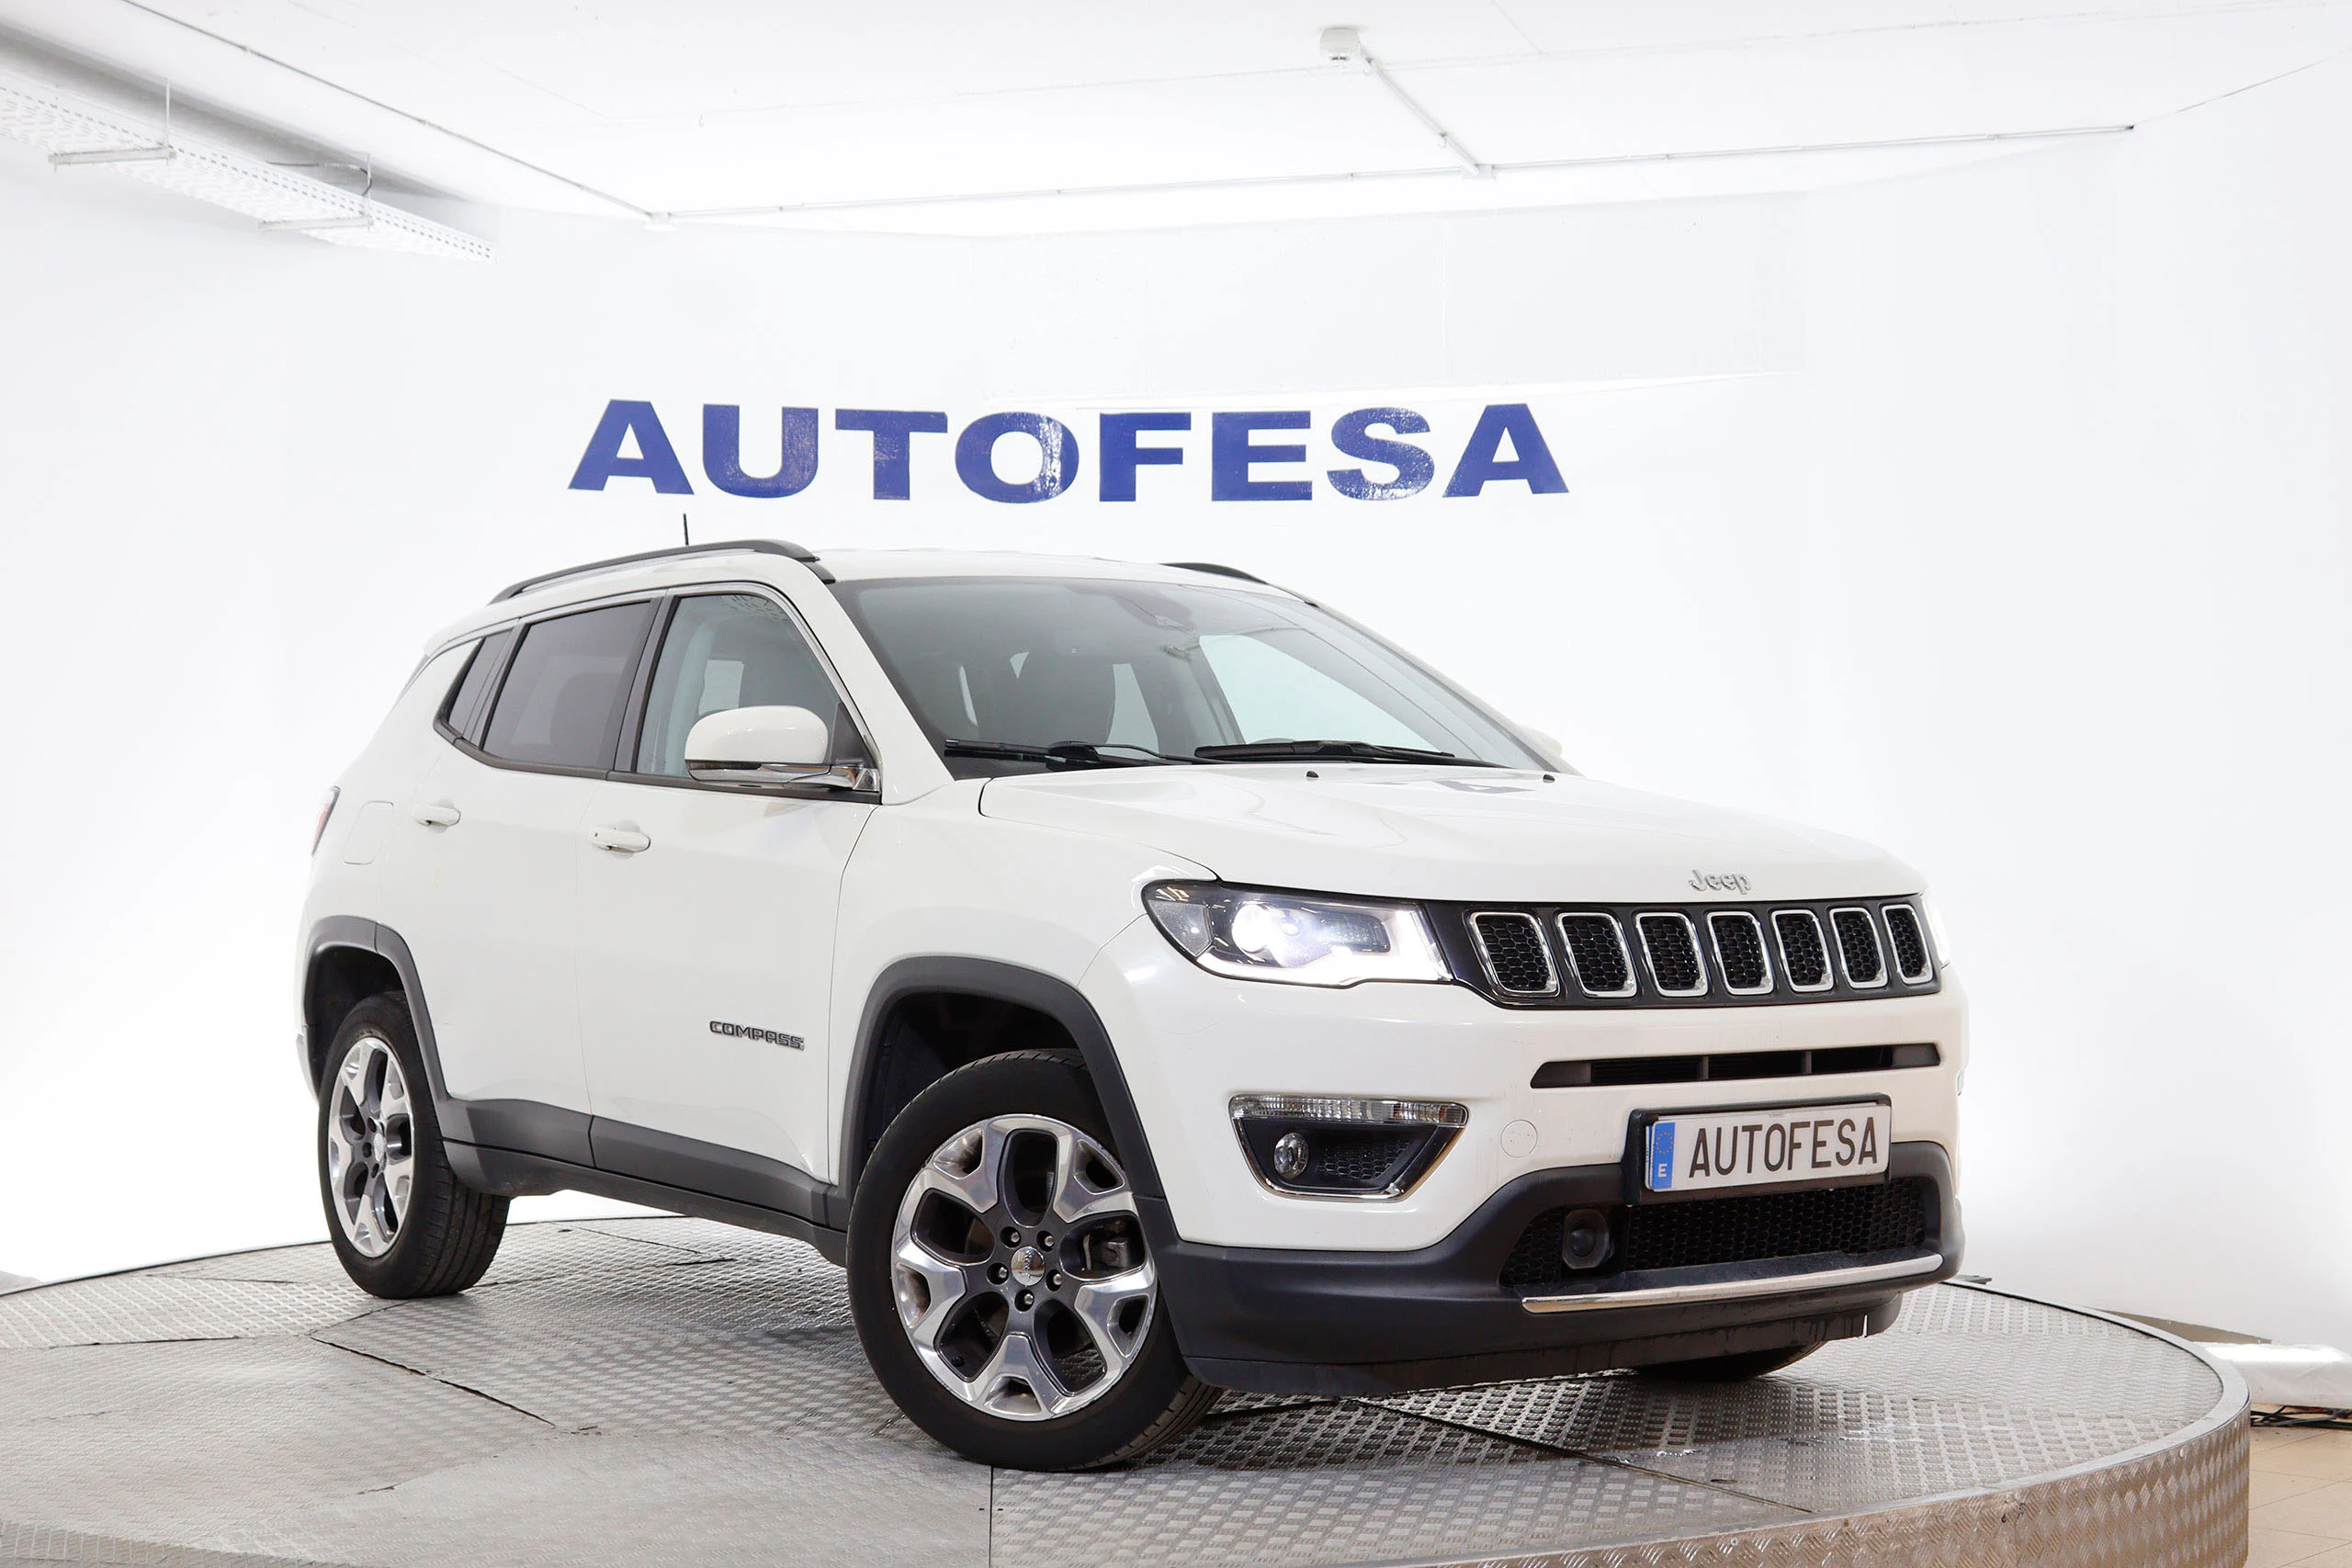 Jeep Compass 2.0 Limited 4X4 170cv Auto 5P S/S # IVA DEDUCIBLE, NAVY, FAROS LED, PARKTRONIC - Foto 3